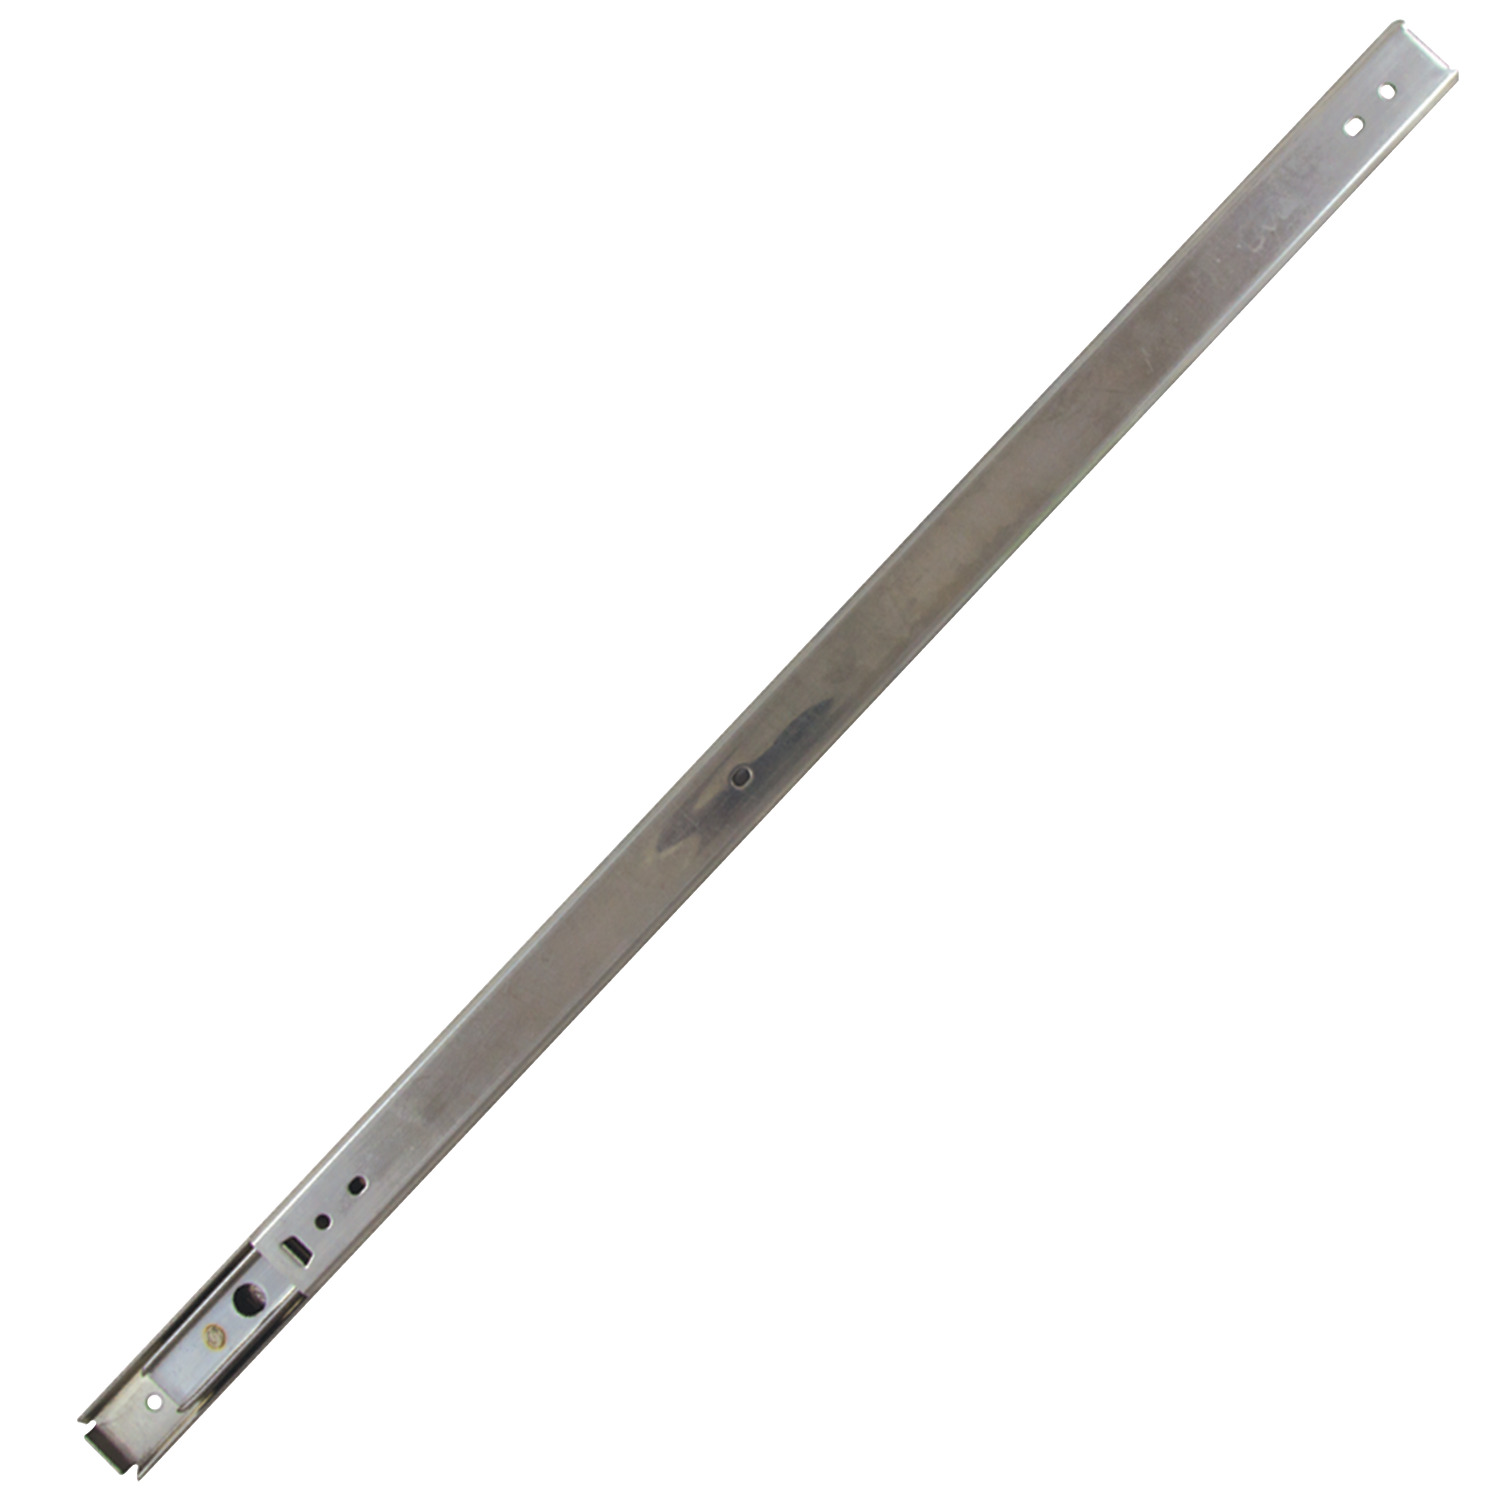 L2080.AC0200 Drawer Slide Full Extension Length 200; Load 30kg per pair. Sold Individually. Stainless